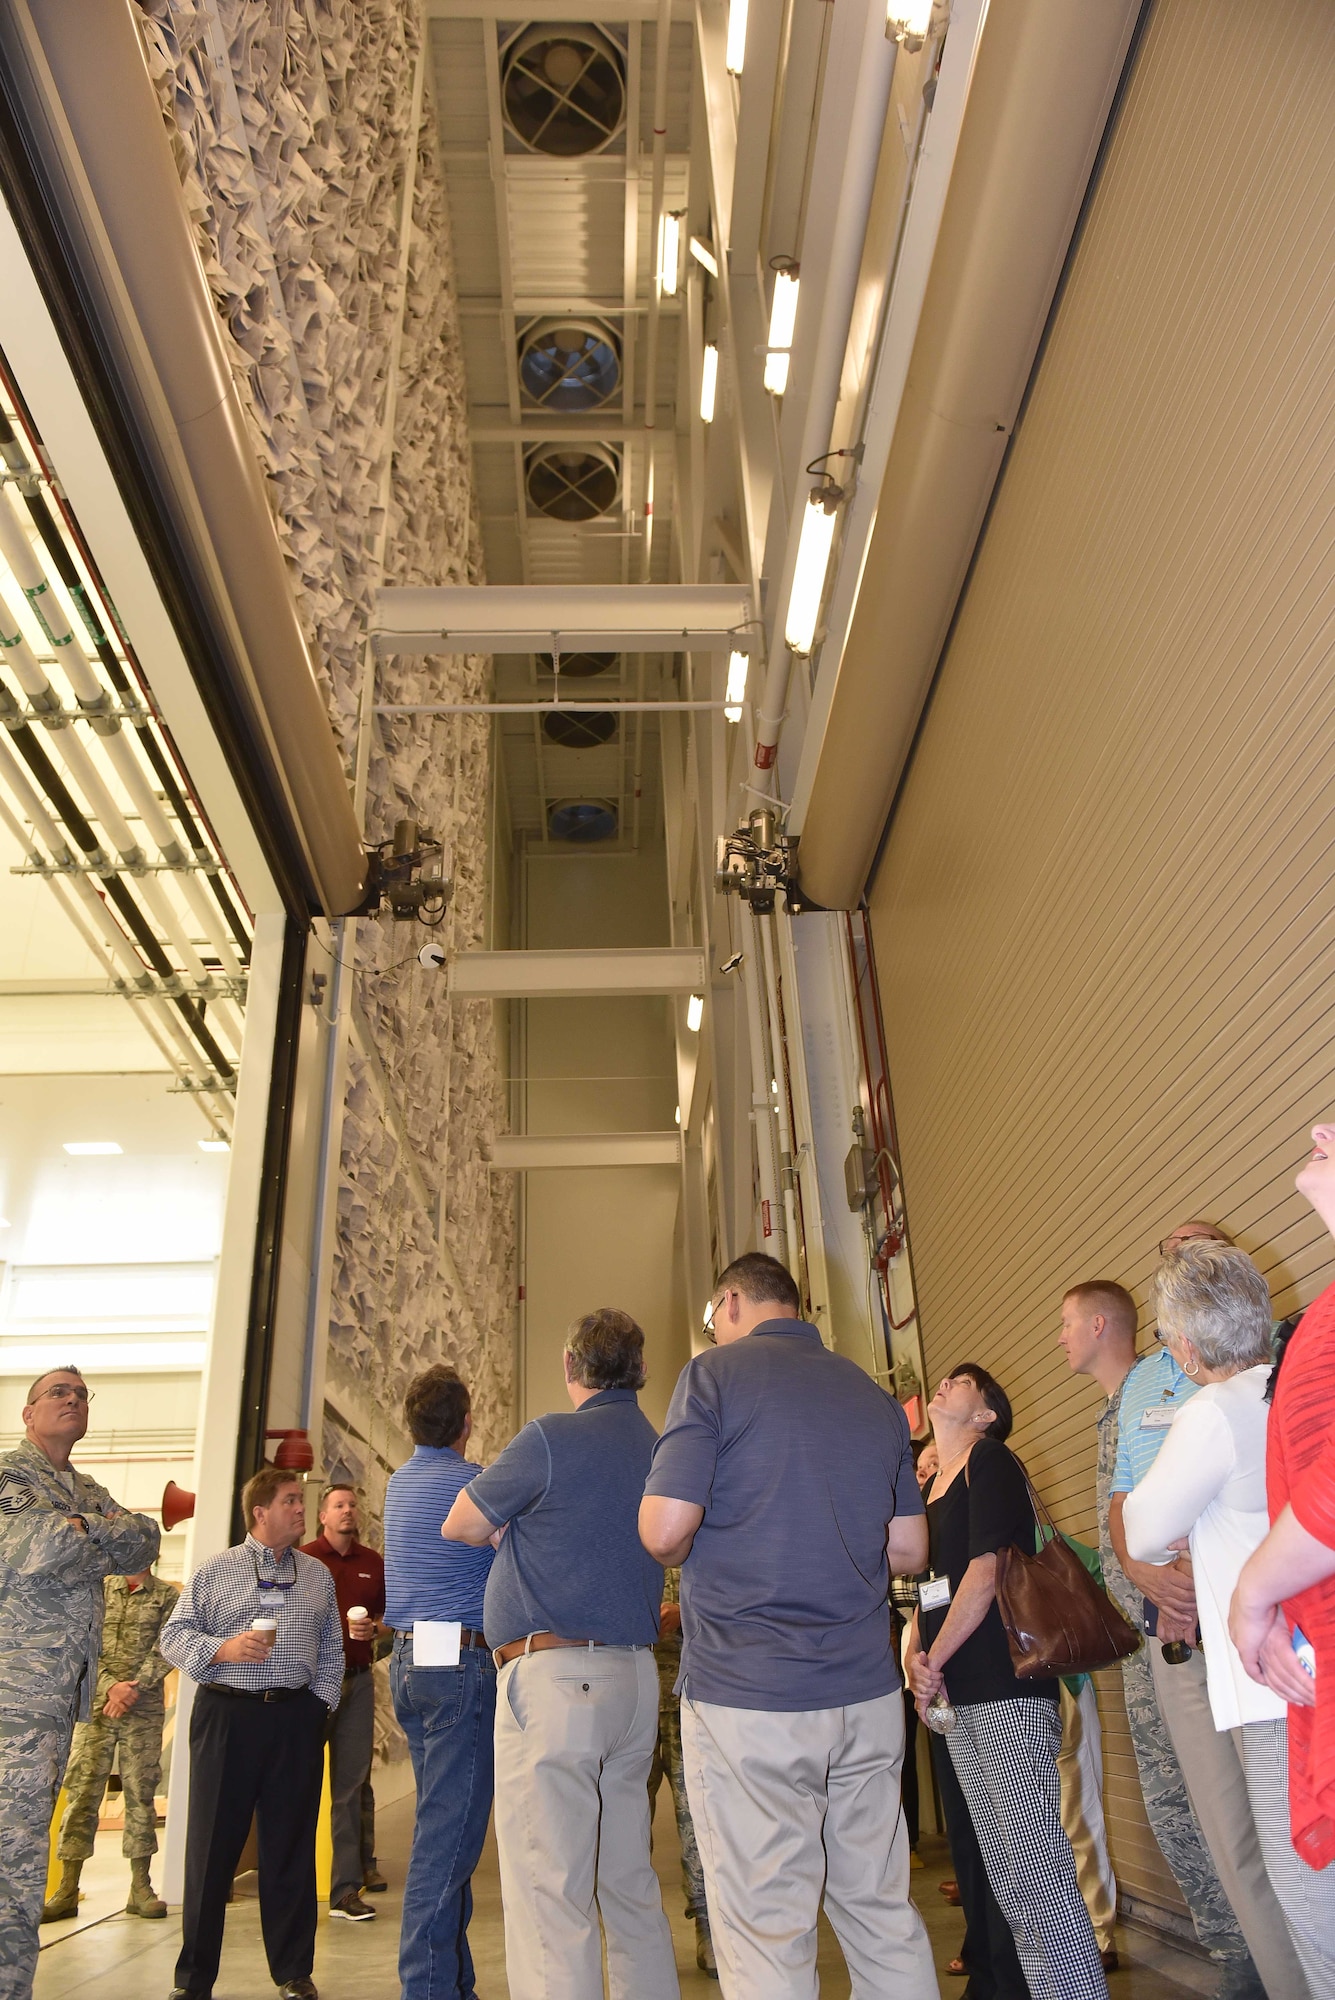 Civic leaders from Little Rock Air Force Base, Arkansas, look at a filtration system for a new hangar built for the Air Force’s newest weapon system, the KC-46 Pegasus July 27, 2018 at McConnell AFB, Kansas. The twenty civic leaders visited McConnell to learn more about the base’s intelligence and air refueling missions. (U.S. Air Force photo by Staff Sgt. David Bernal Del Agua)